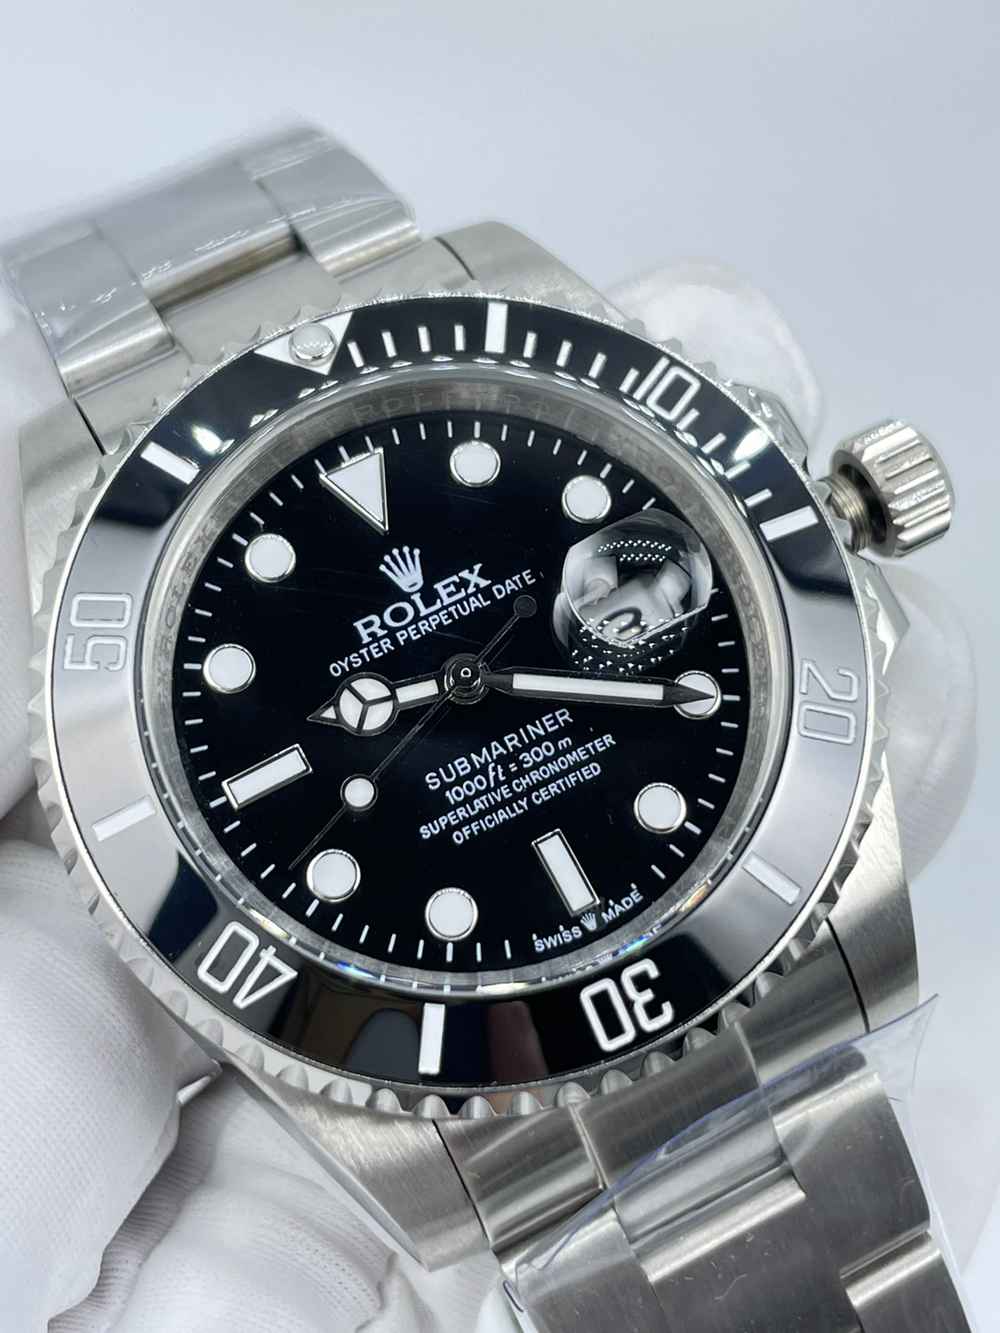 SUB 41mm classic Rolex model silver/black stainless steel AAA automatic 2813 movement men watch S028